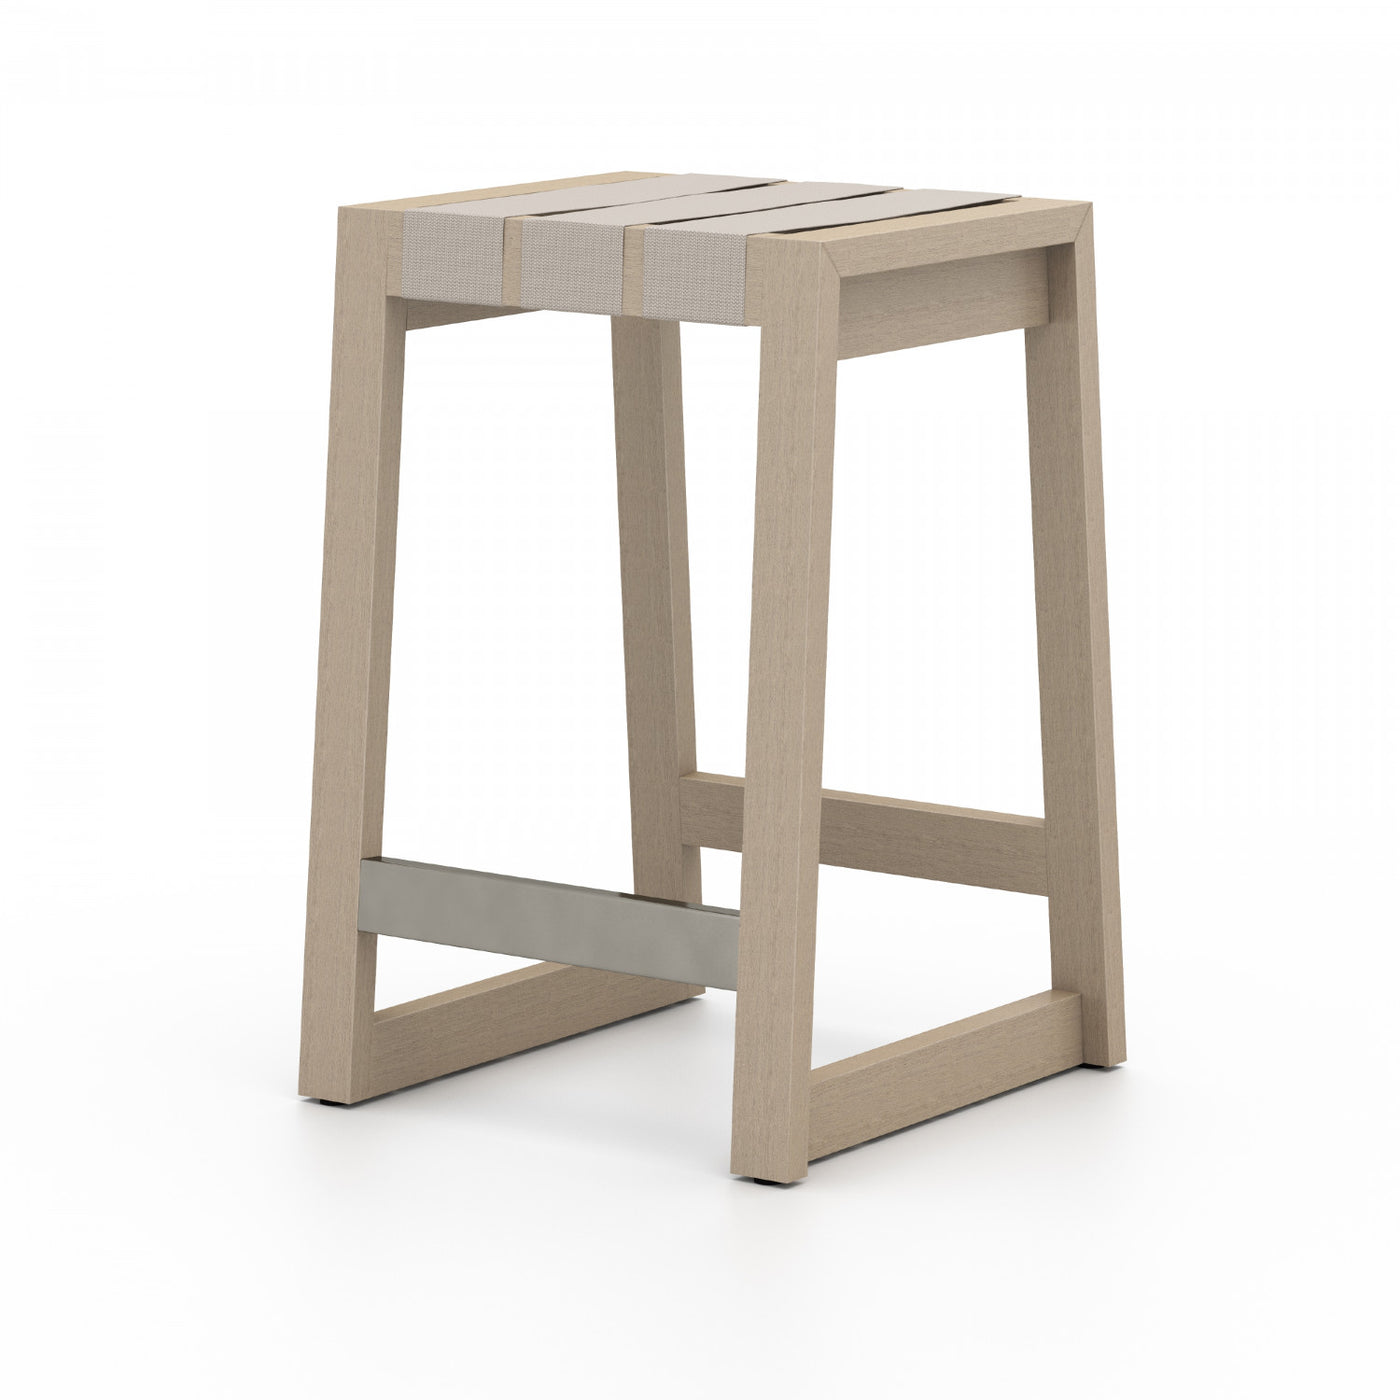 SONOMA OUTDOOR COUNTER STOOL, WASHED BROWN